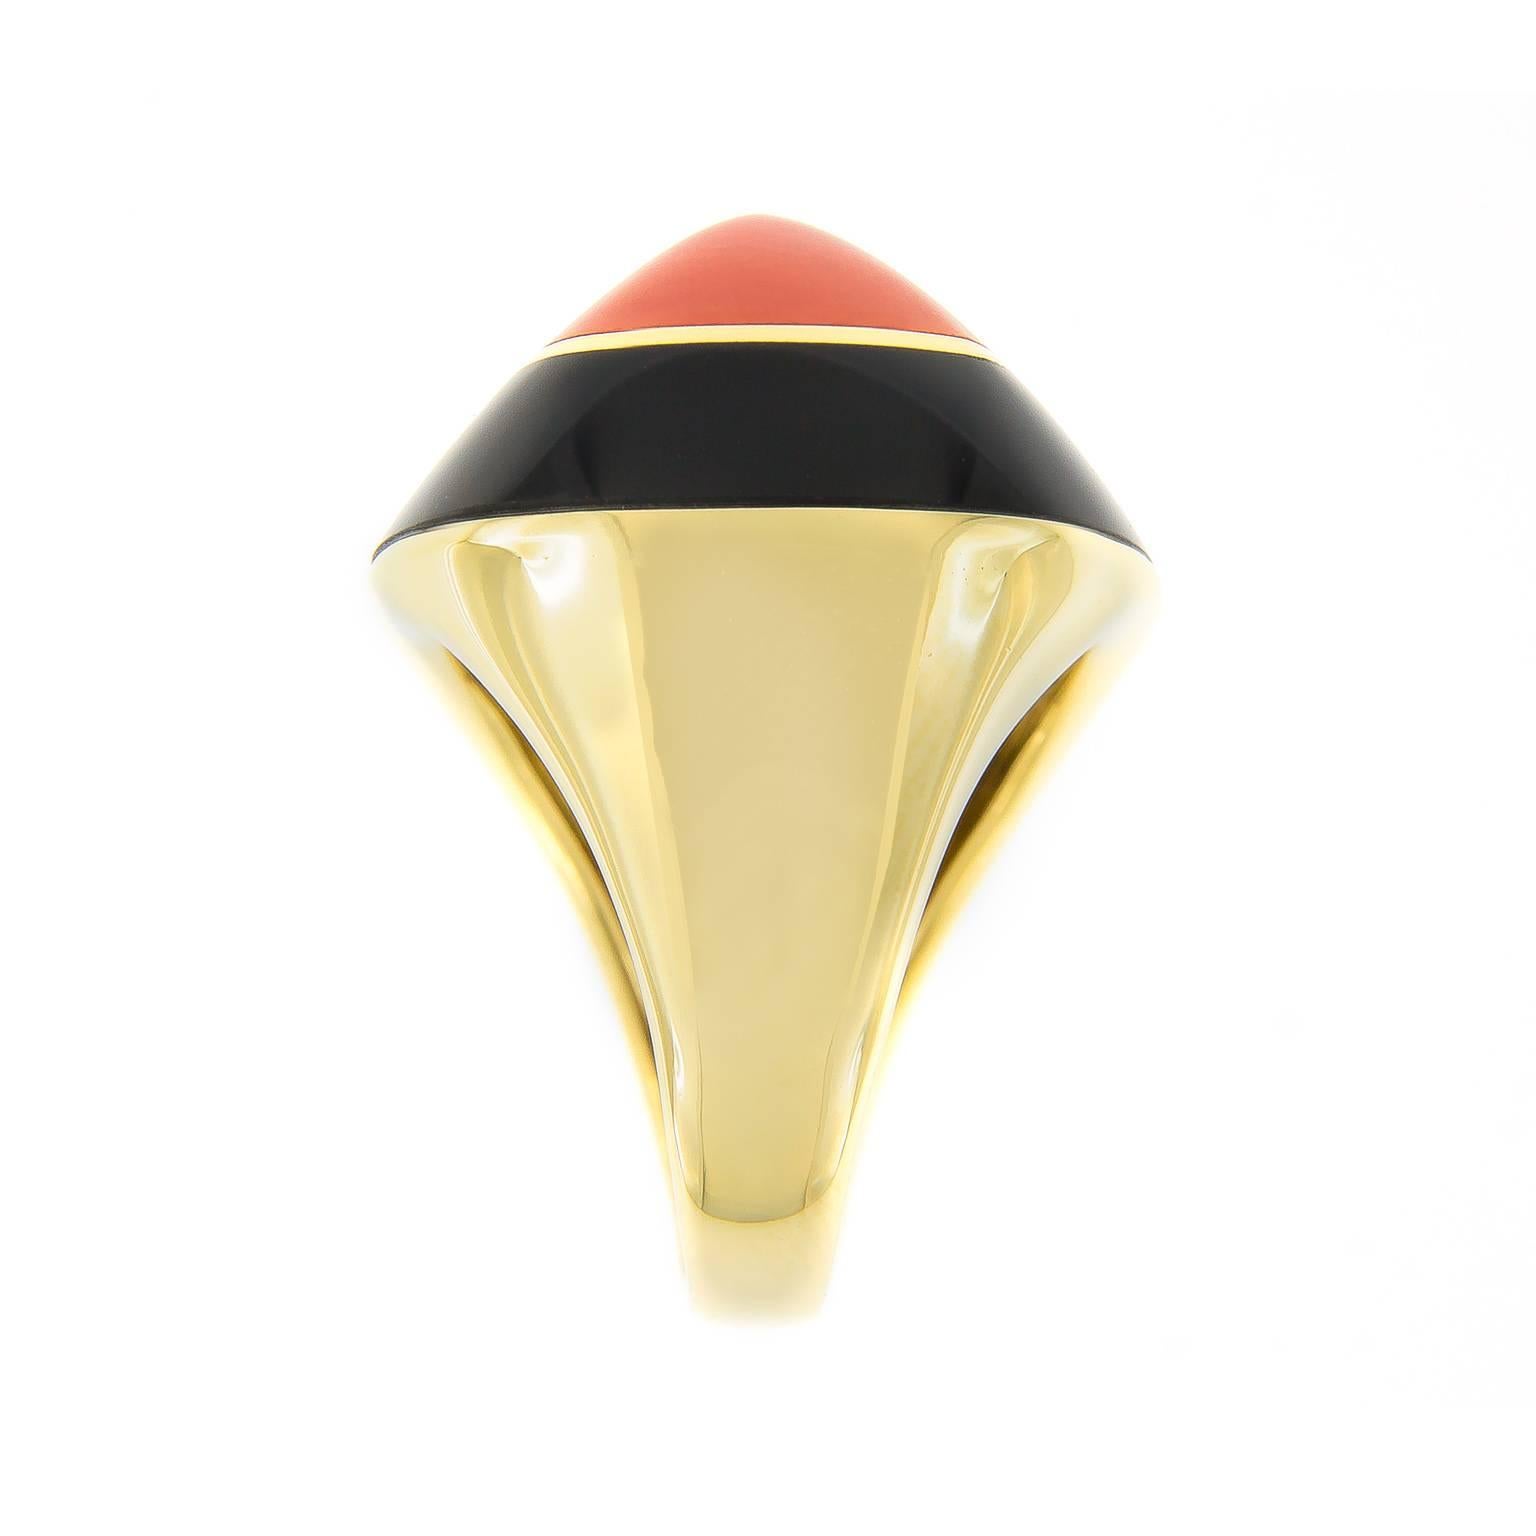 Make a bold statement with this fabulous 18k yellow gold ring made for Campanelli & Pear by Molina. Retro in style, this pyramidal ring features a fine Mediterranean coral center stone surrounded by a band of black onyx.

Hallmarked Italy

Size 6;